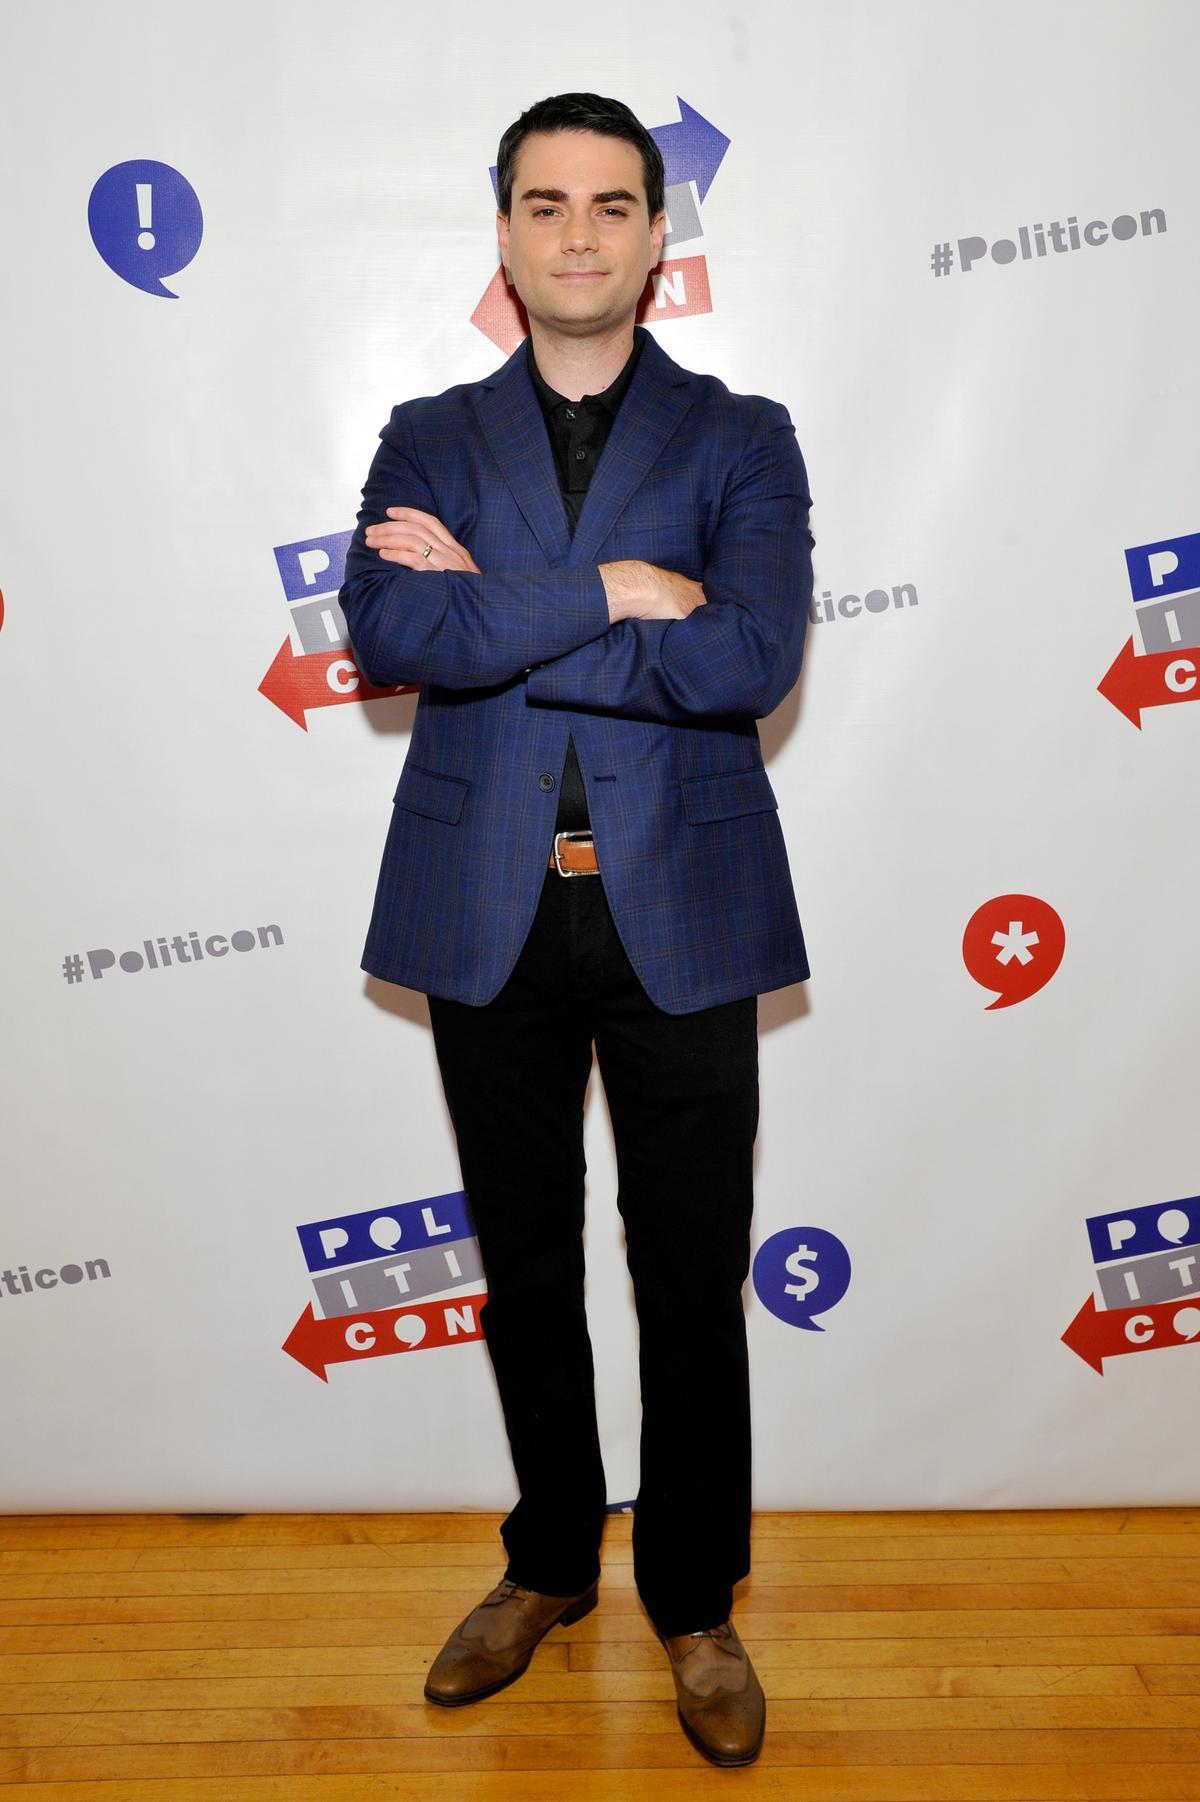 Ben Shapiro attends Politicon at Pasadena Convention Center in California on July 30, 2017 (©Getty Images | <a href="https://www.gettyimages.com.au/detail/news-photo/ben-shapiro-at-politicon-at-pasadena-convention-center-on-news-photo/824530968">John Sciulli</a>)